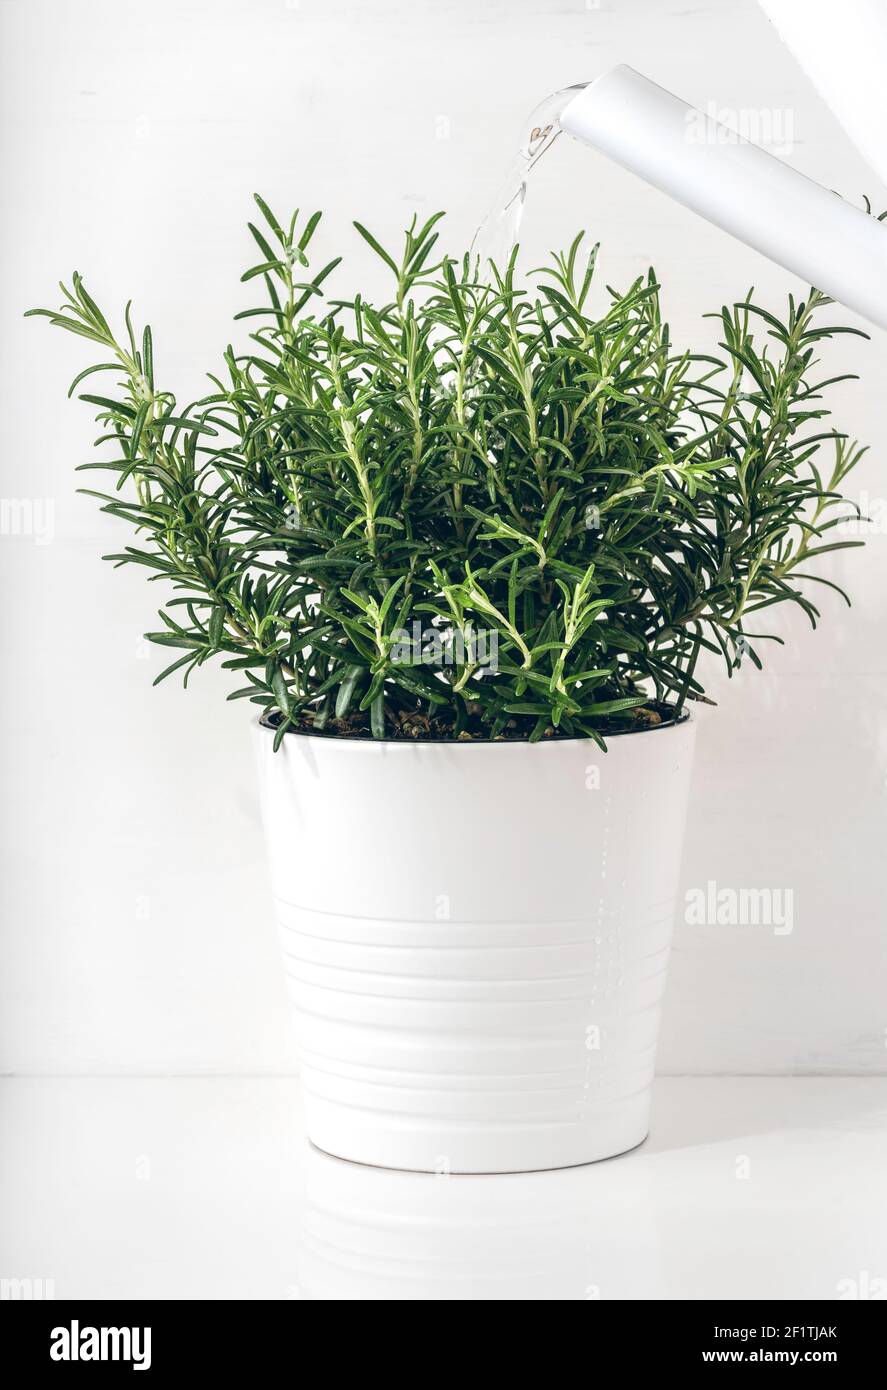 Fresh rosemary is growing in a flower pot indoors. The plant is watered from a watering can. White scandinavian interior design. Stock Photo